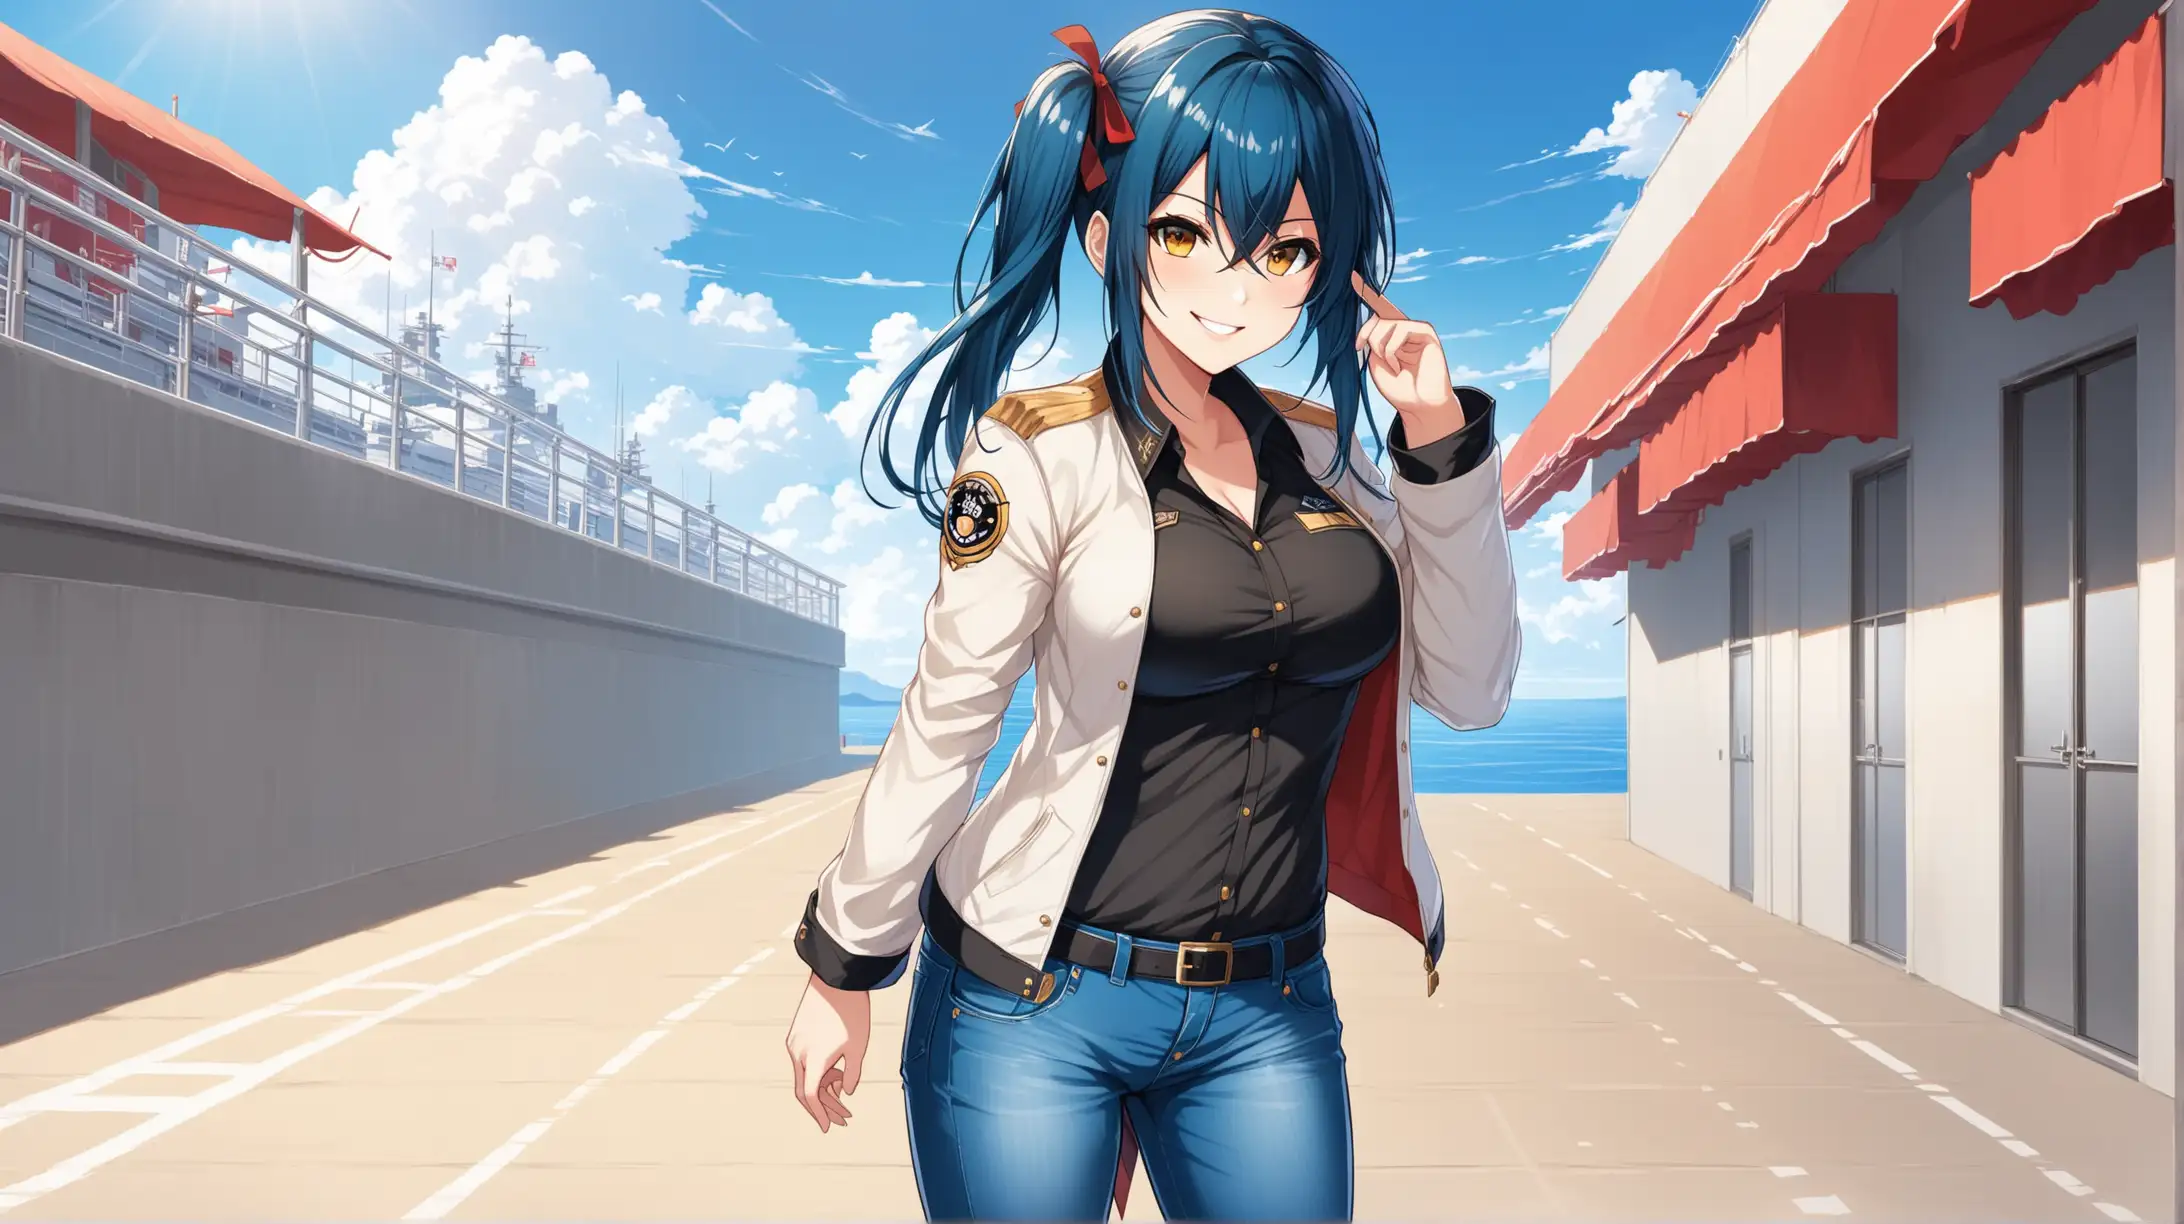 Draw the character Taihou from the game Azur Lane, standing outside on a sunny day, wearing jeans and a jacket, smiling at the viewer